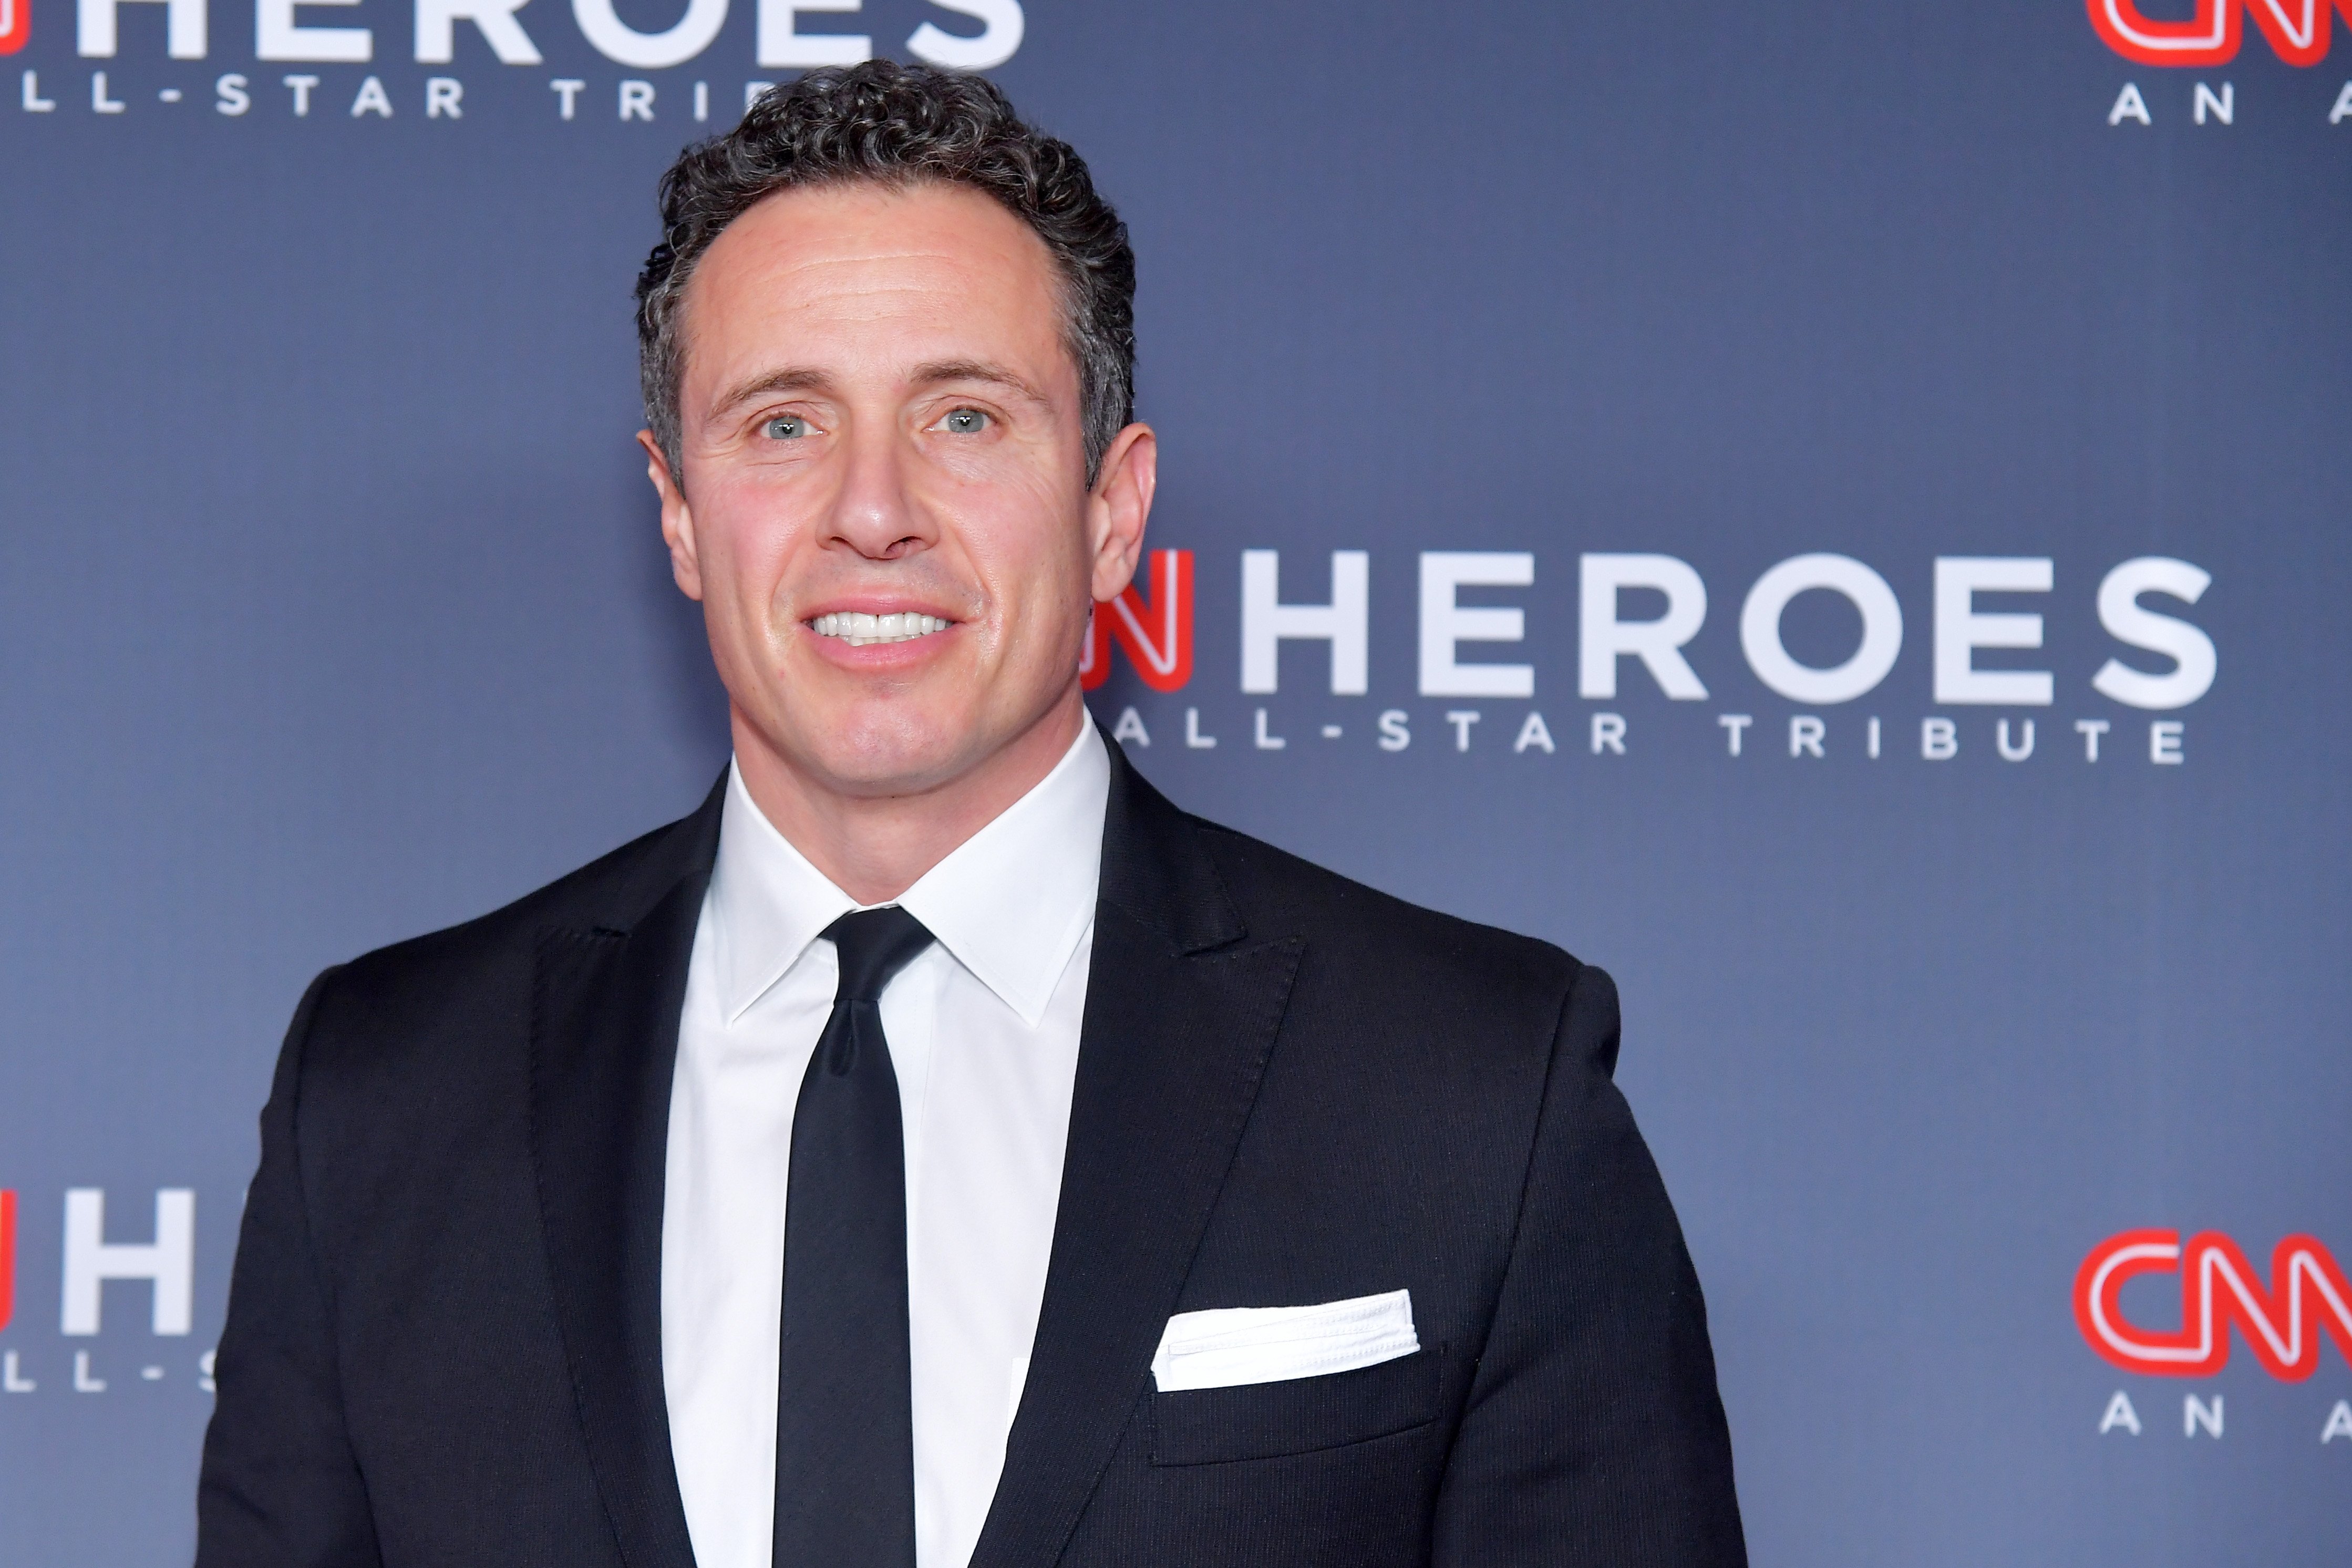 NEW YORK, NY - DECEMBER 09: Chris Cuomo attends the 12th Annual CNN Heroes: An All-Star Tribute at American Museum of Natural History on December 9, 2018 in New York City. (Photo by Michael Loccisano/Getty Images for CNN )